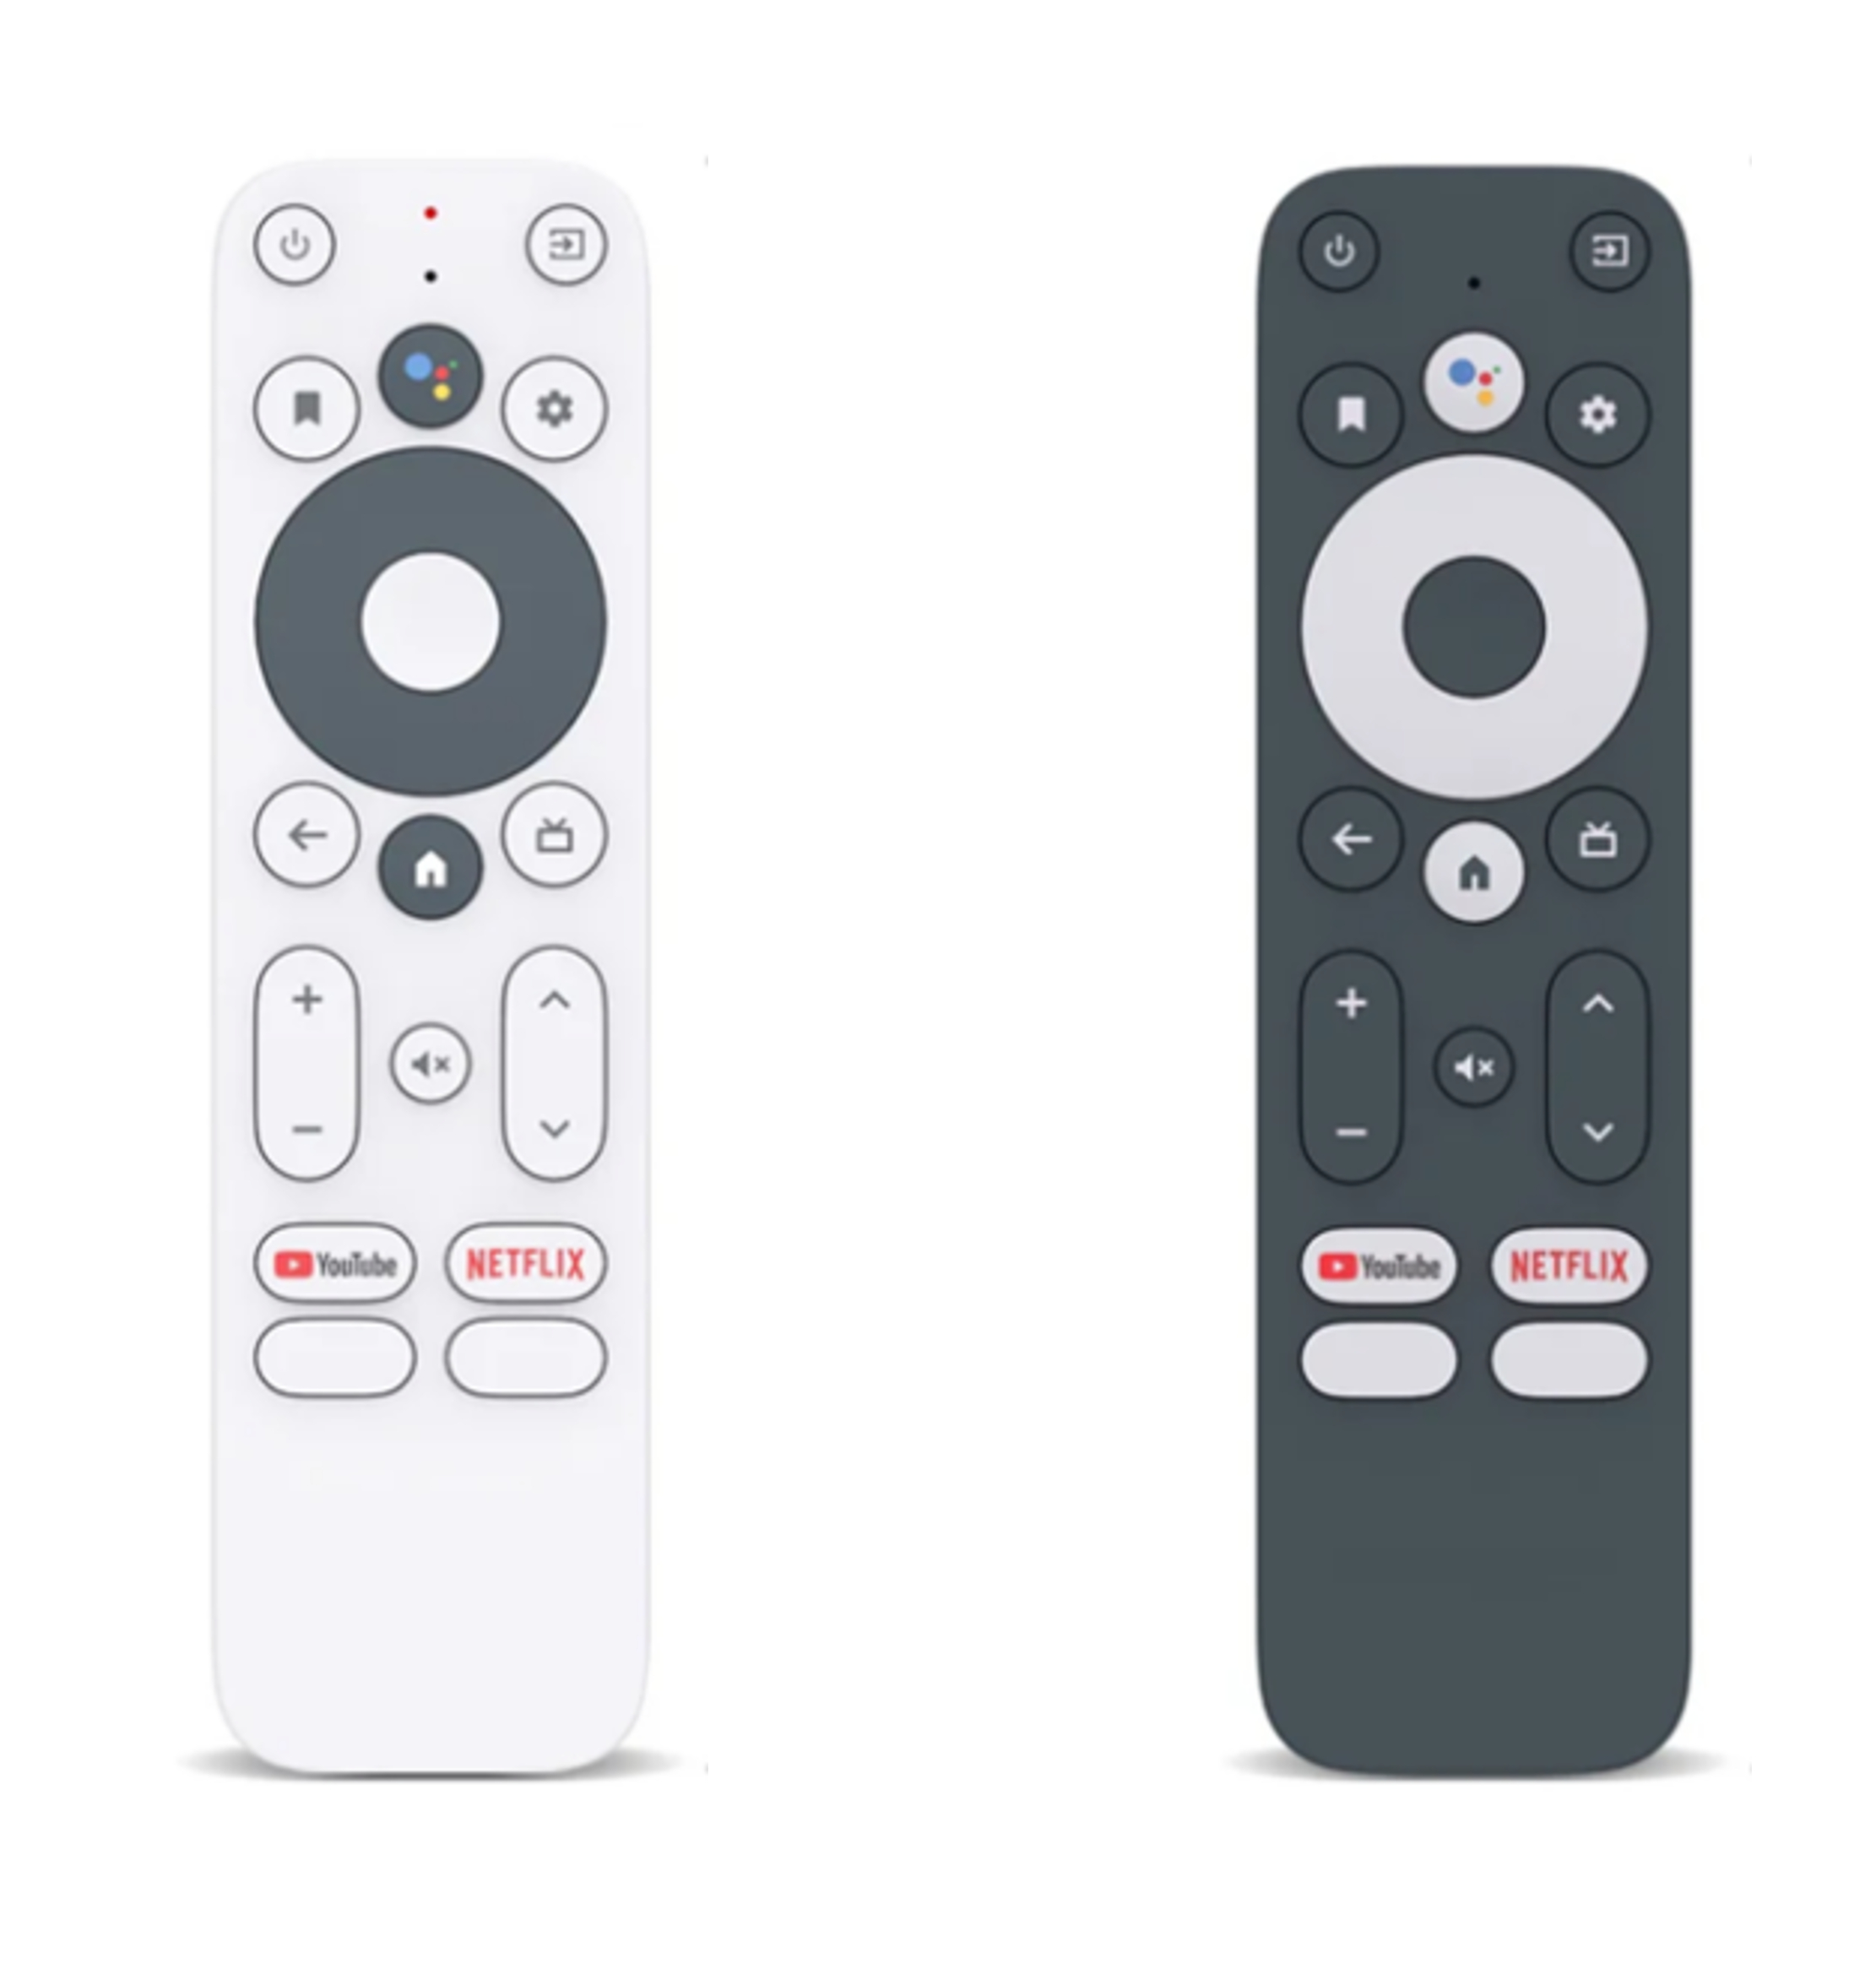 Android TV remote control design example based on Atmosic's ATM Bluetooth SoC